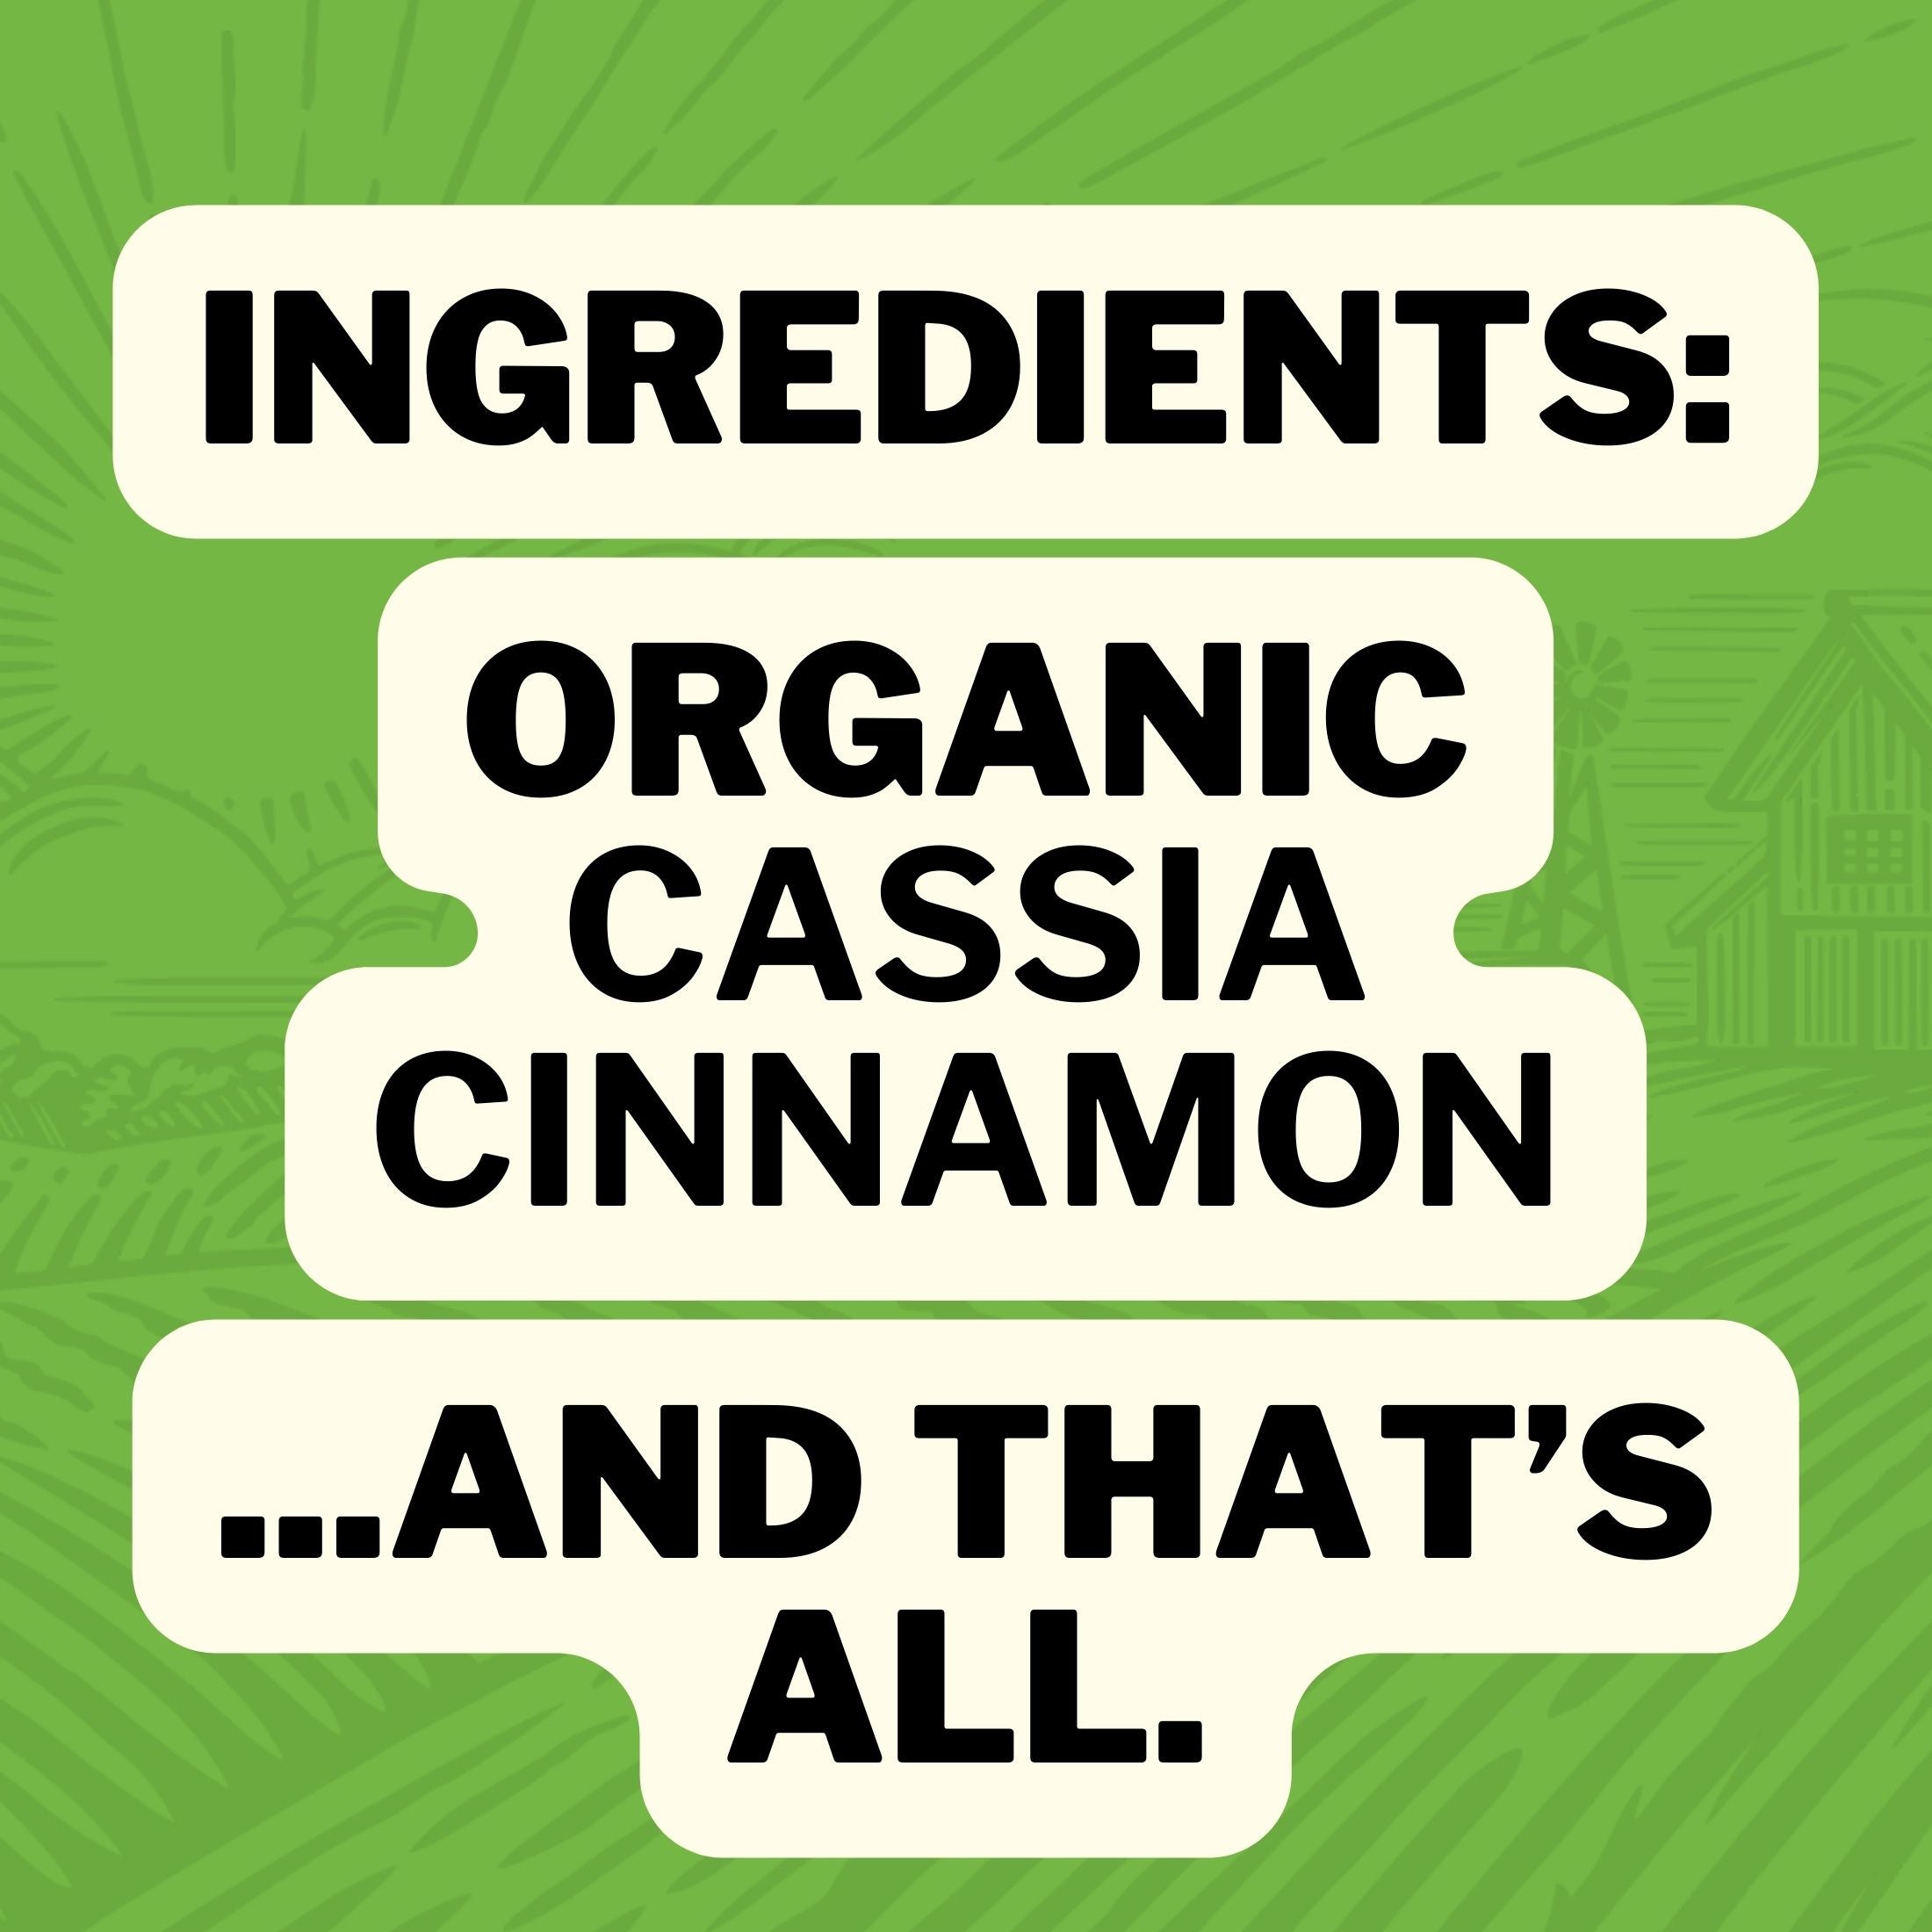 Ingredients : Organic Cassia Cinnamon ... and that's all.